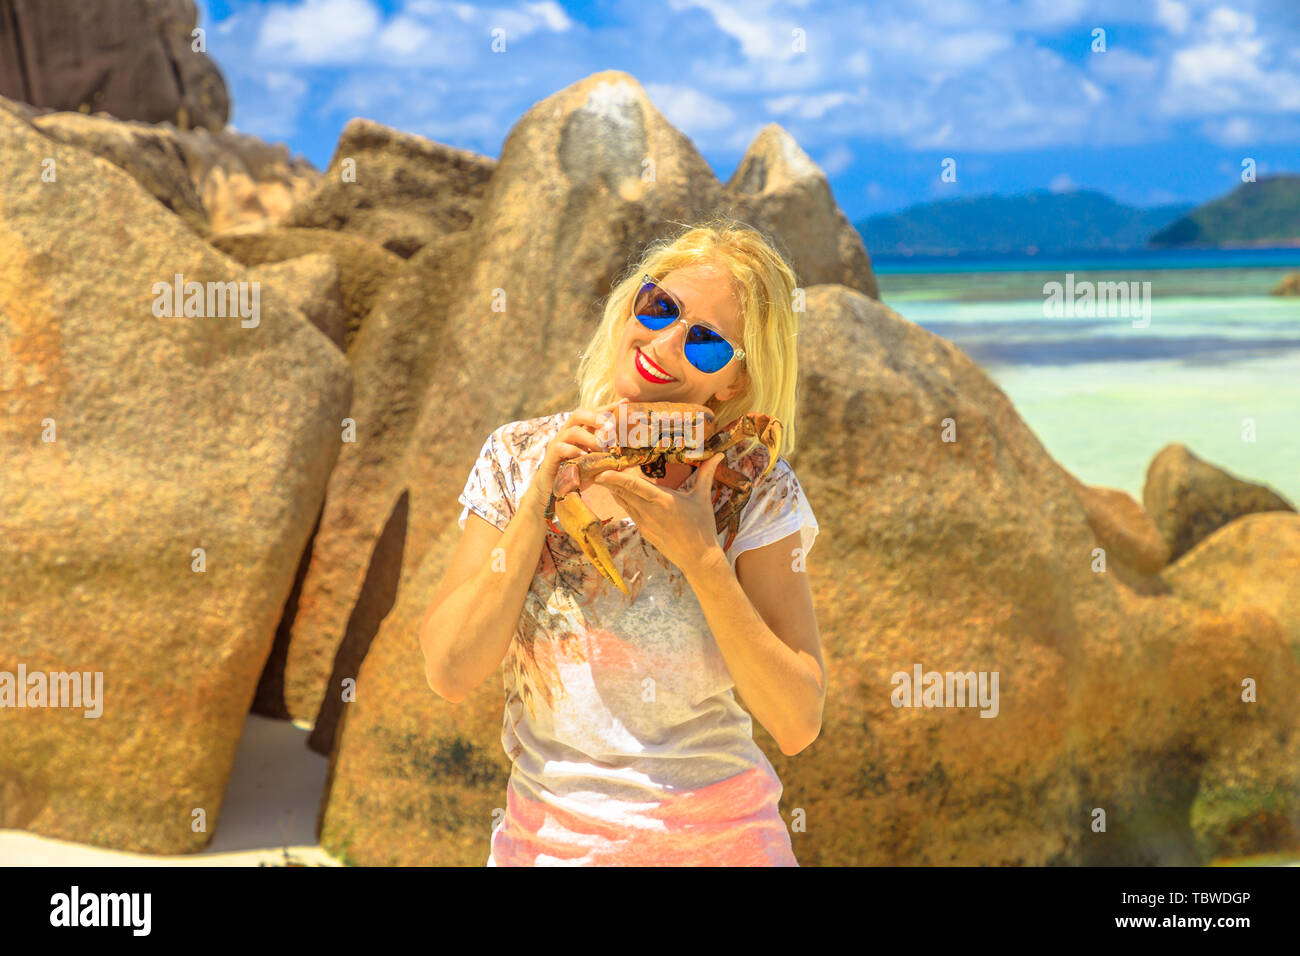 Tourism in Seychelles, Africa, Indian Ocean. Tourist woman holding an Ocypode Ceratophthalmus or Ghost Crab or Sand Crab with one claw being larger Stock Photo